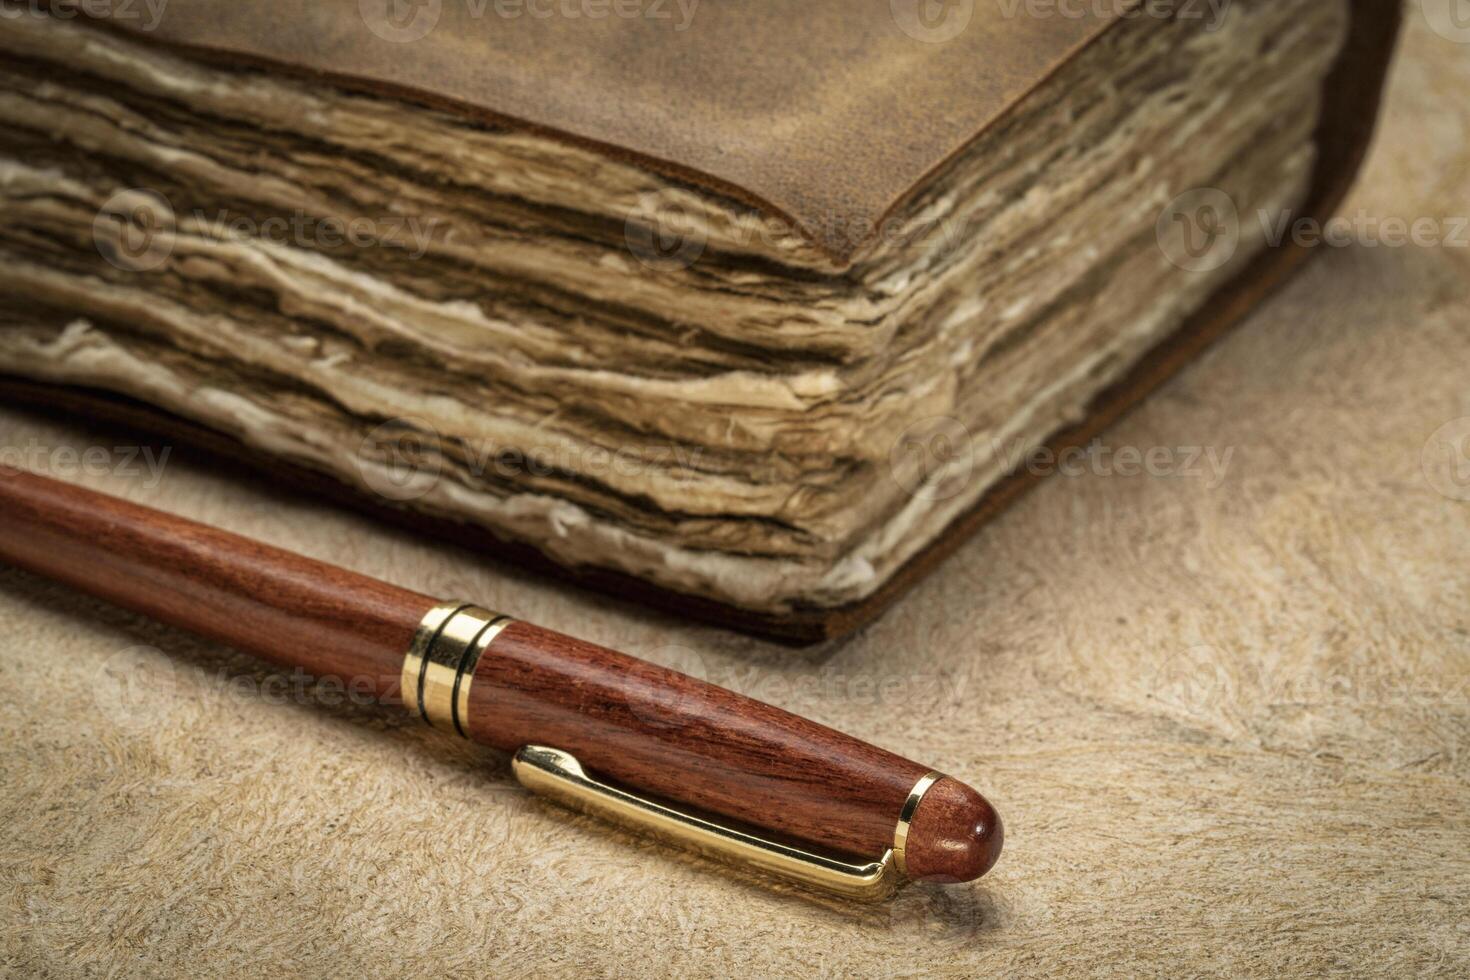 stylish wooden pen and a retro leather-bound journal with decked edge handmade paper pages on a textured bark paper, journaling concept photo